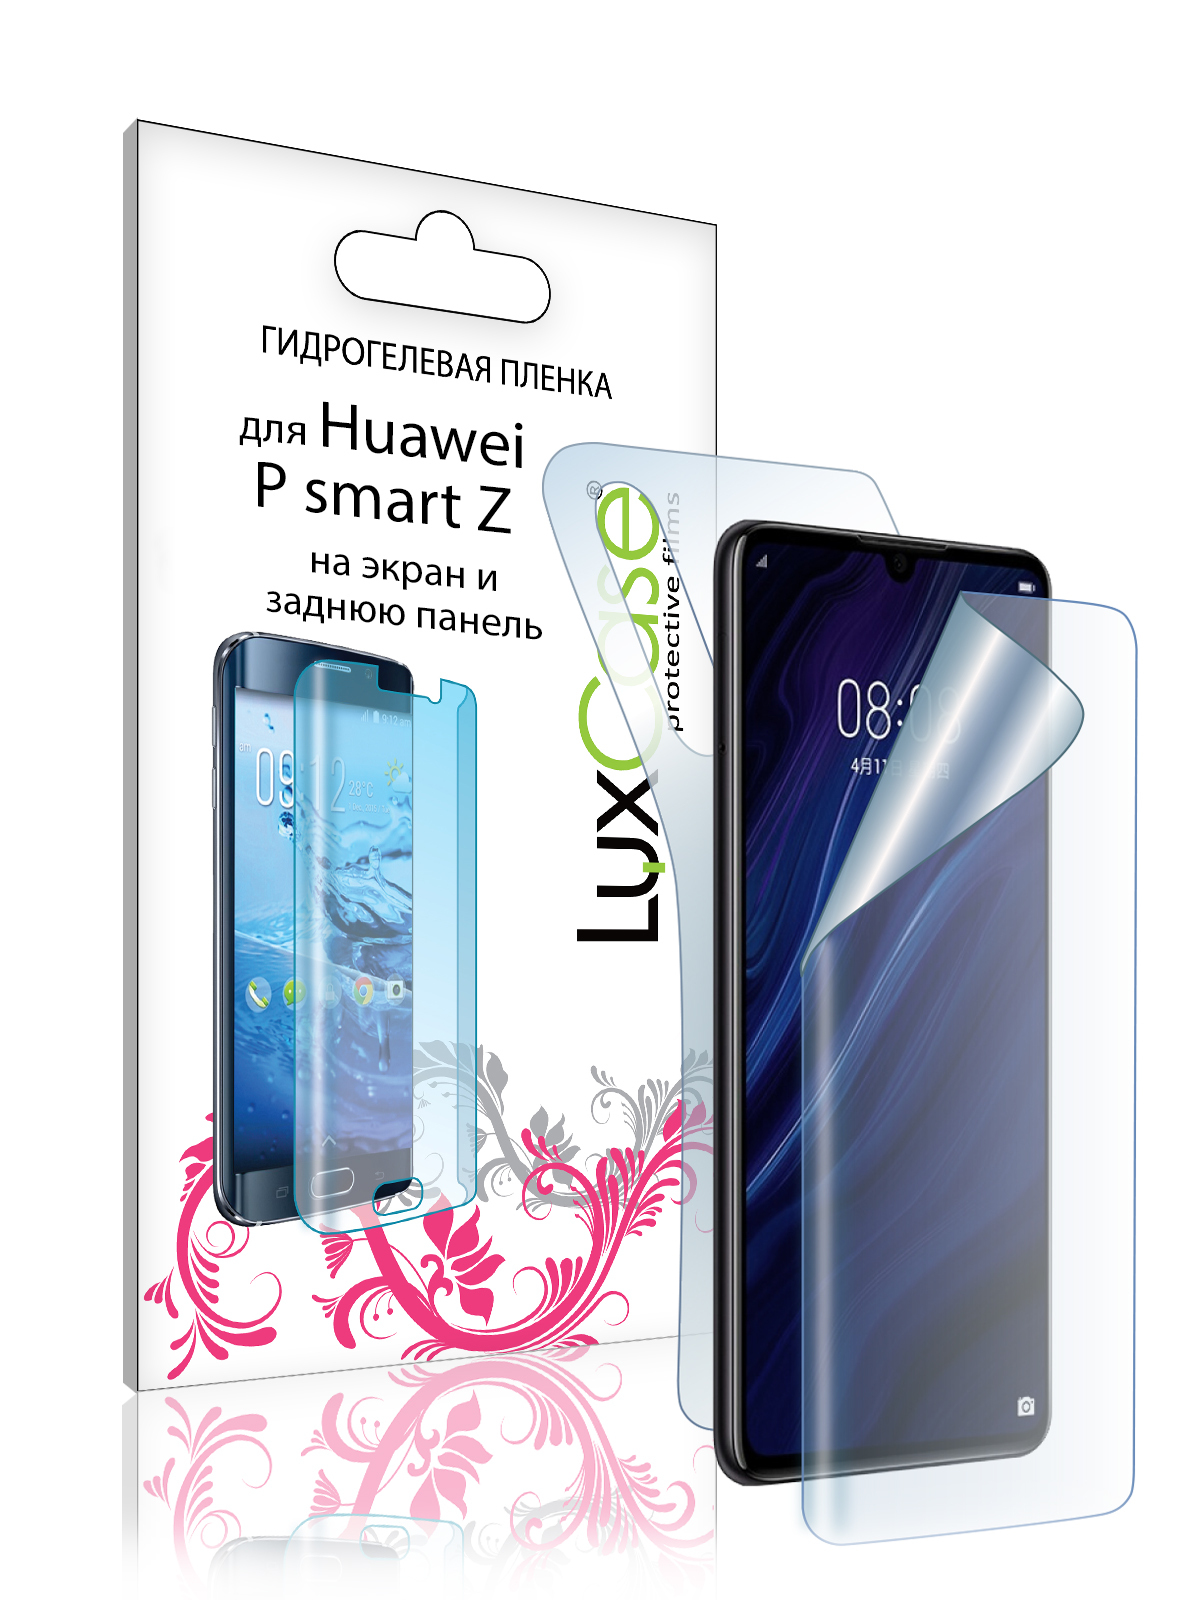 Пленка гидрогелевая LuxCase для Huawei P Smart Z 0.14mm Front and Back Transperent 86708 гидрогелевая пленка luxcase для huawei p smart z 0 14mm front and back transperent 86708